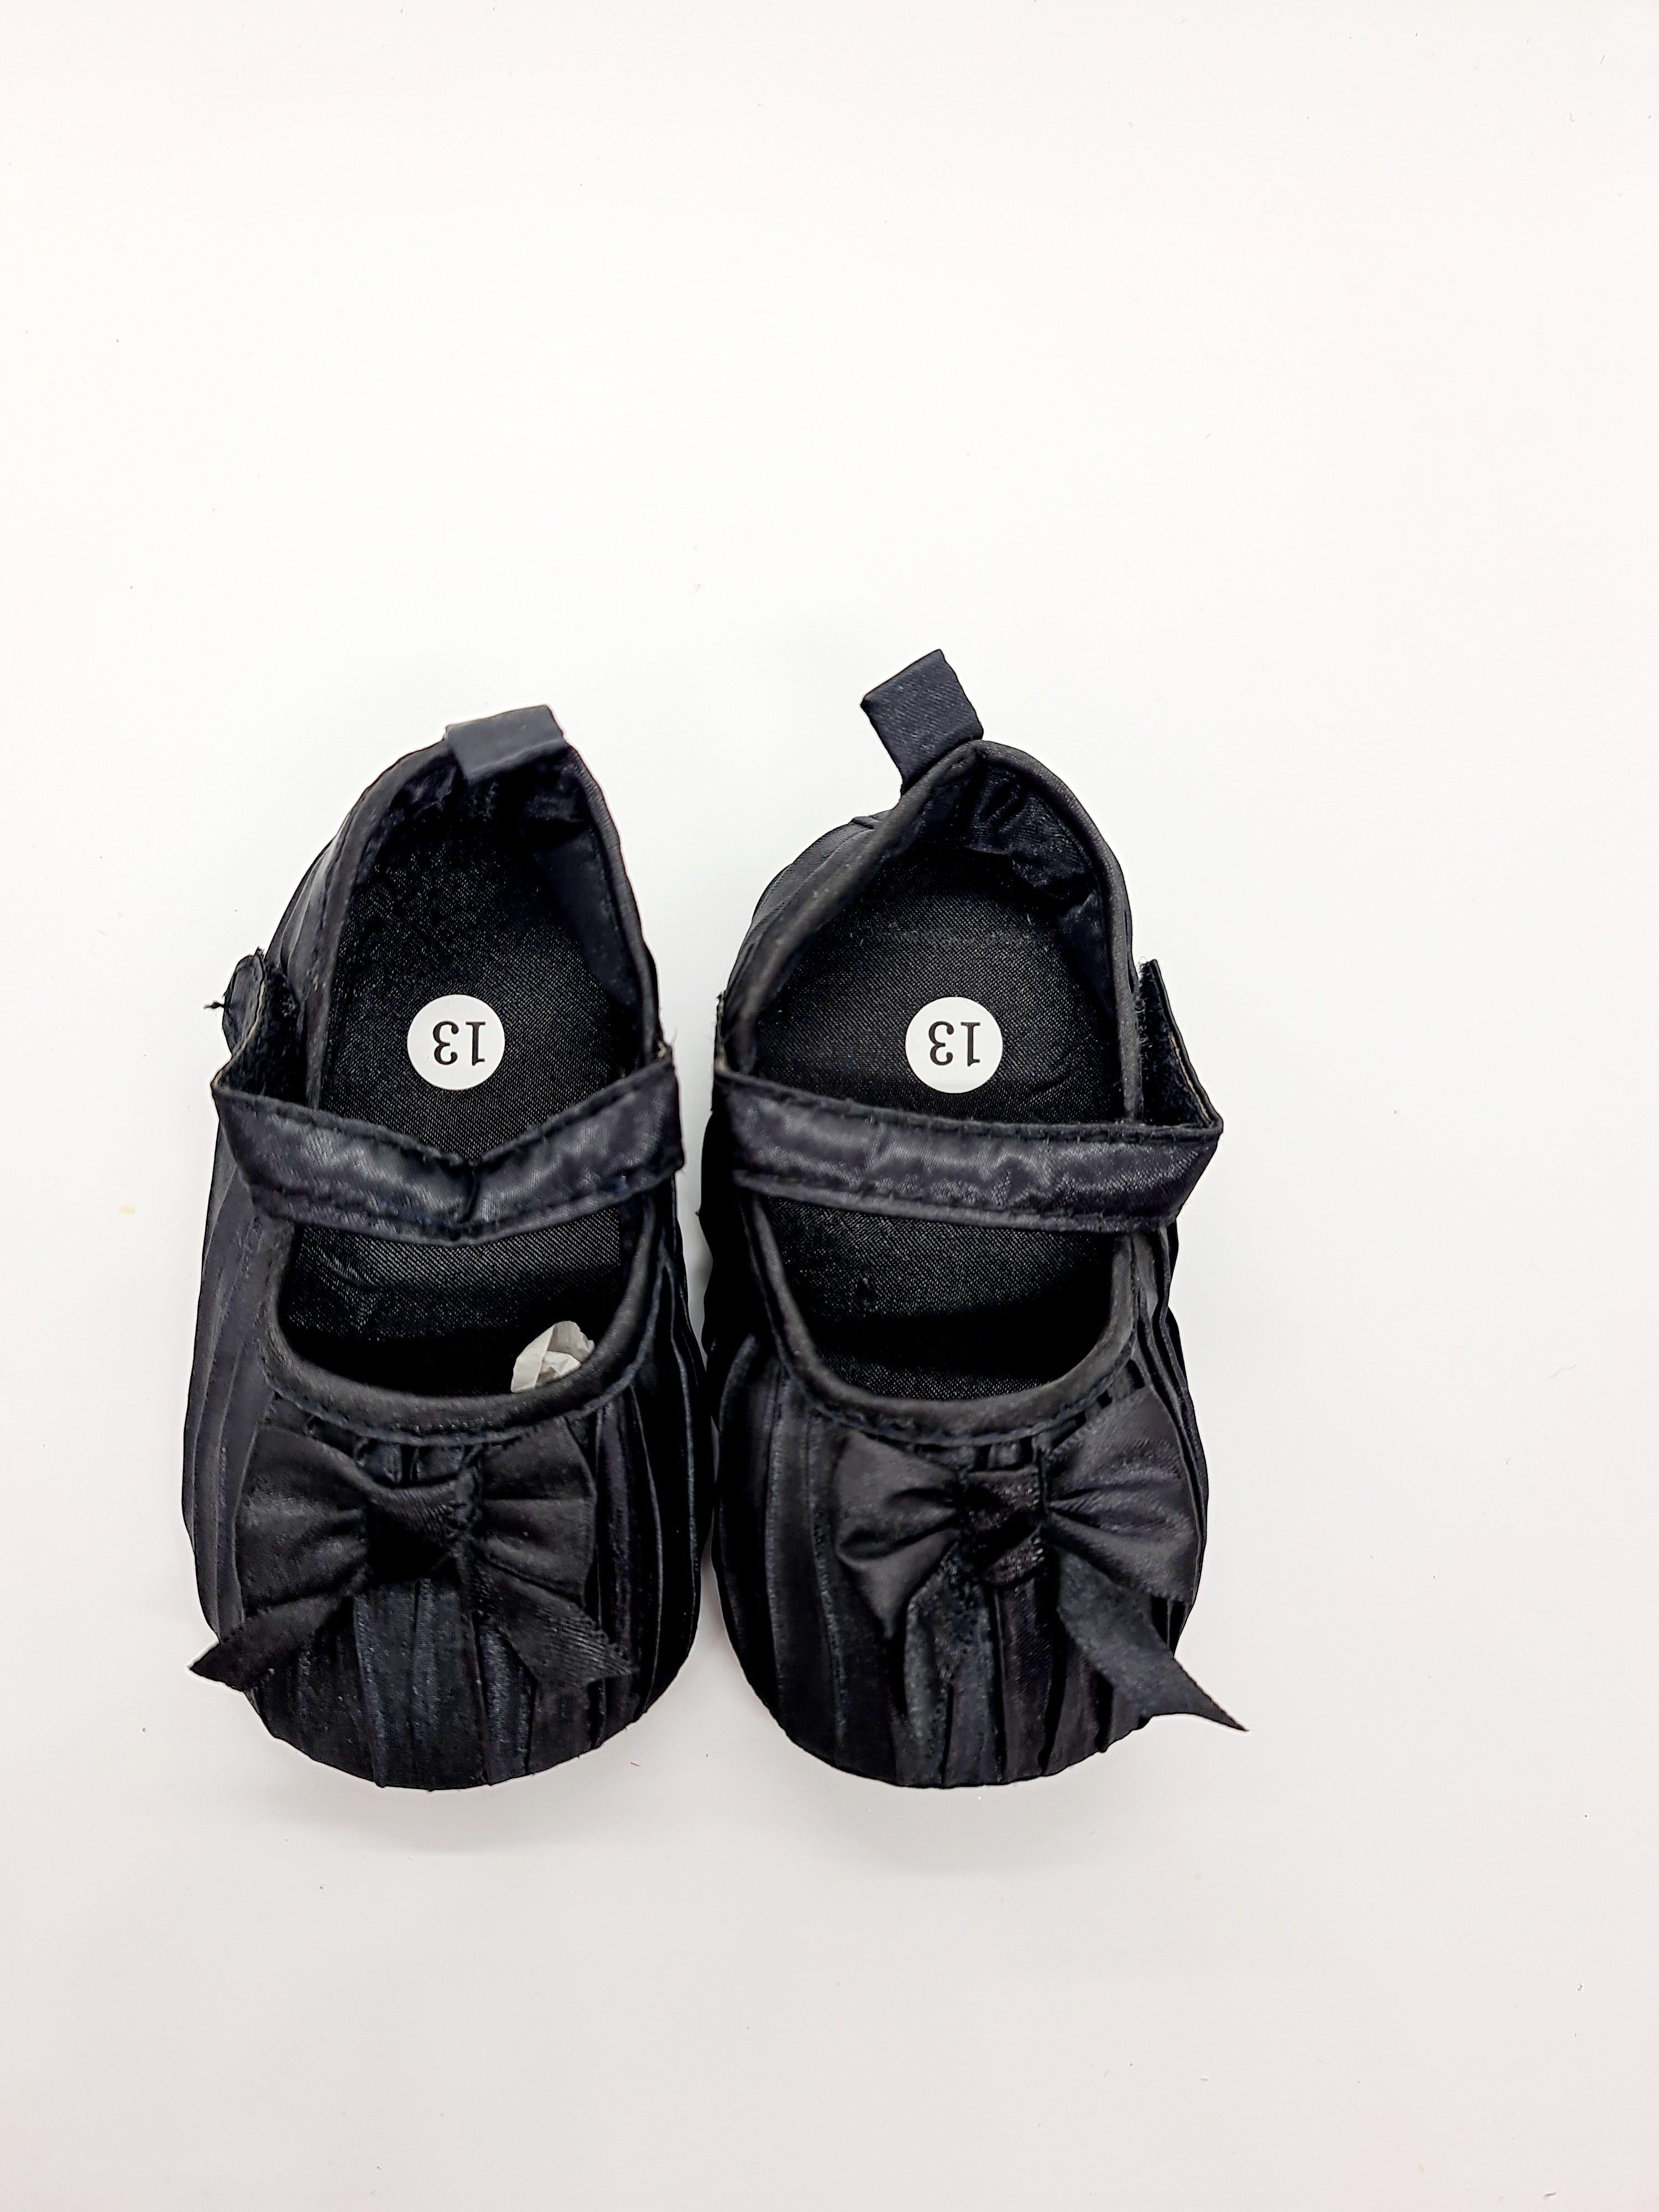 Soft Fabric Baby Shoes- Black Bow